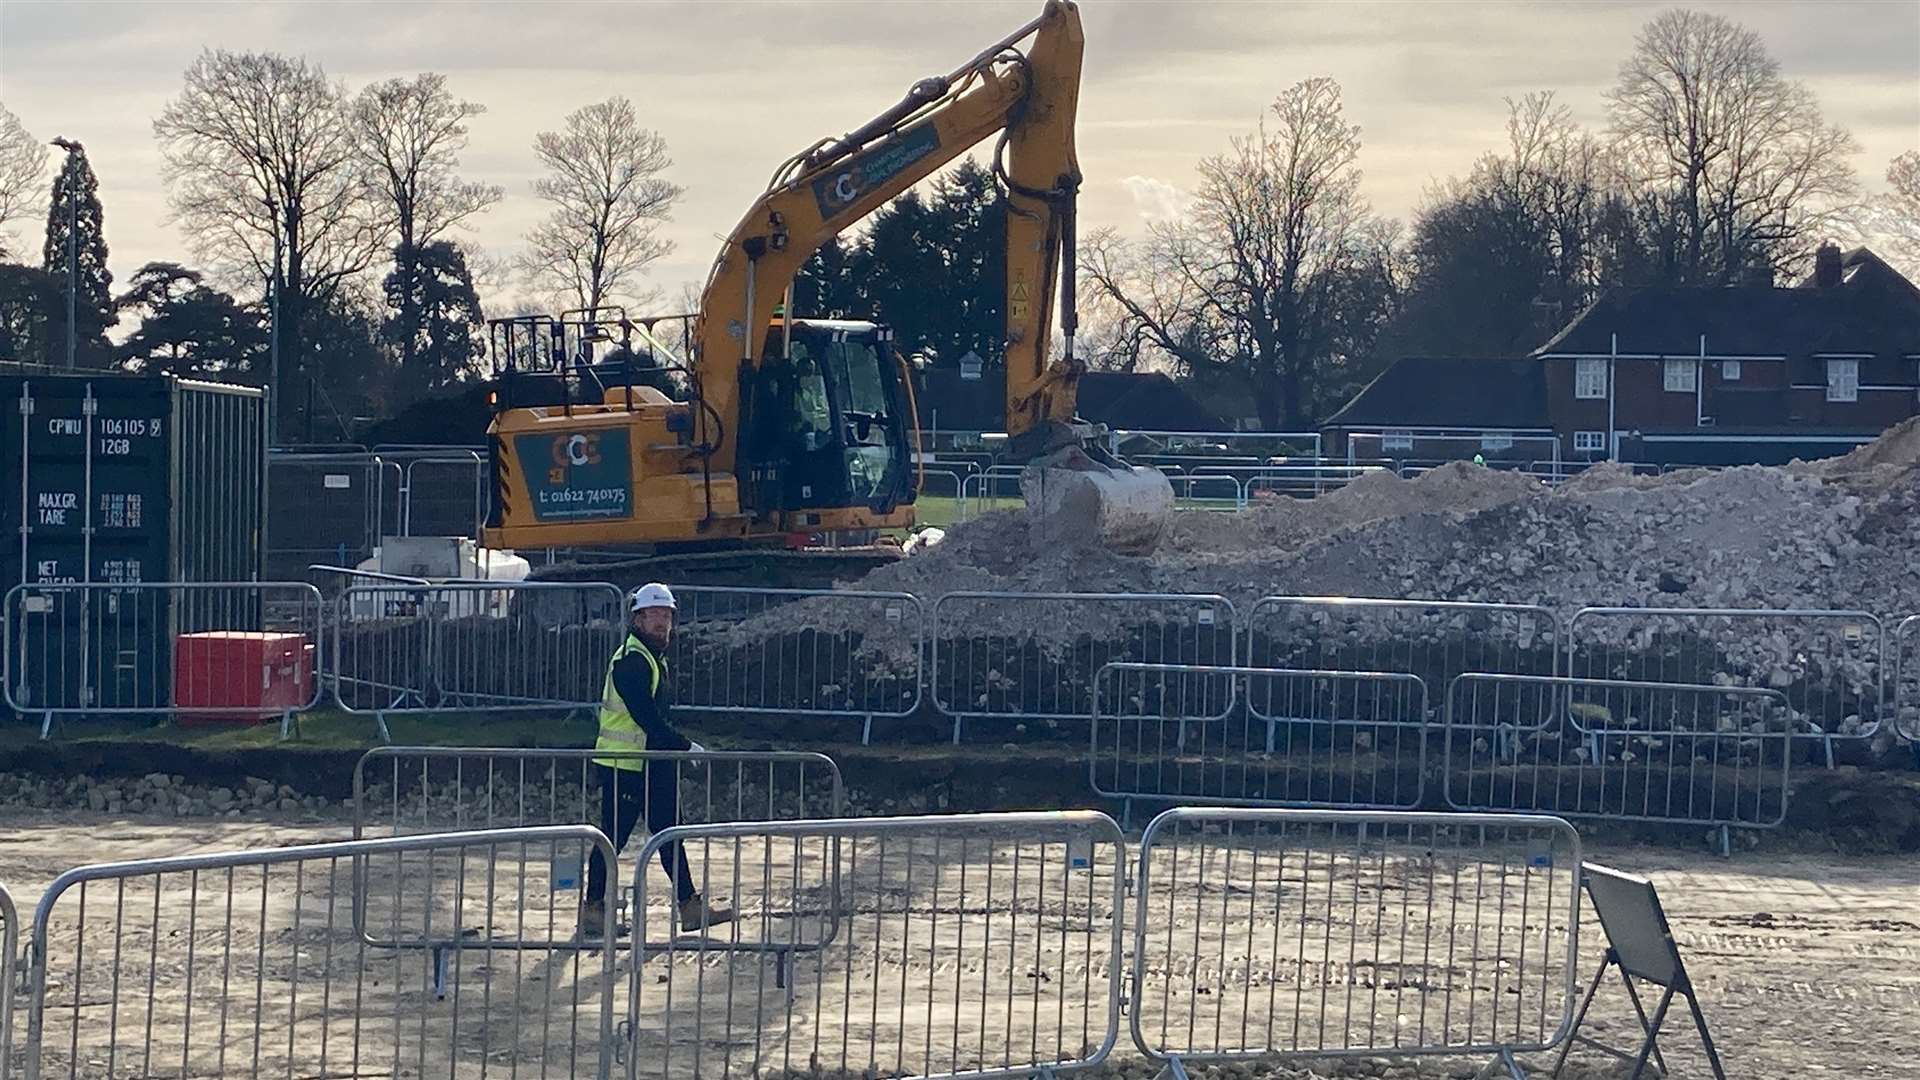 Diggers from construction company Kier have begun work on new classrooms at Borden Grammar School for Boys in Sittingbourne. It is expected to take at least a year